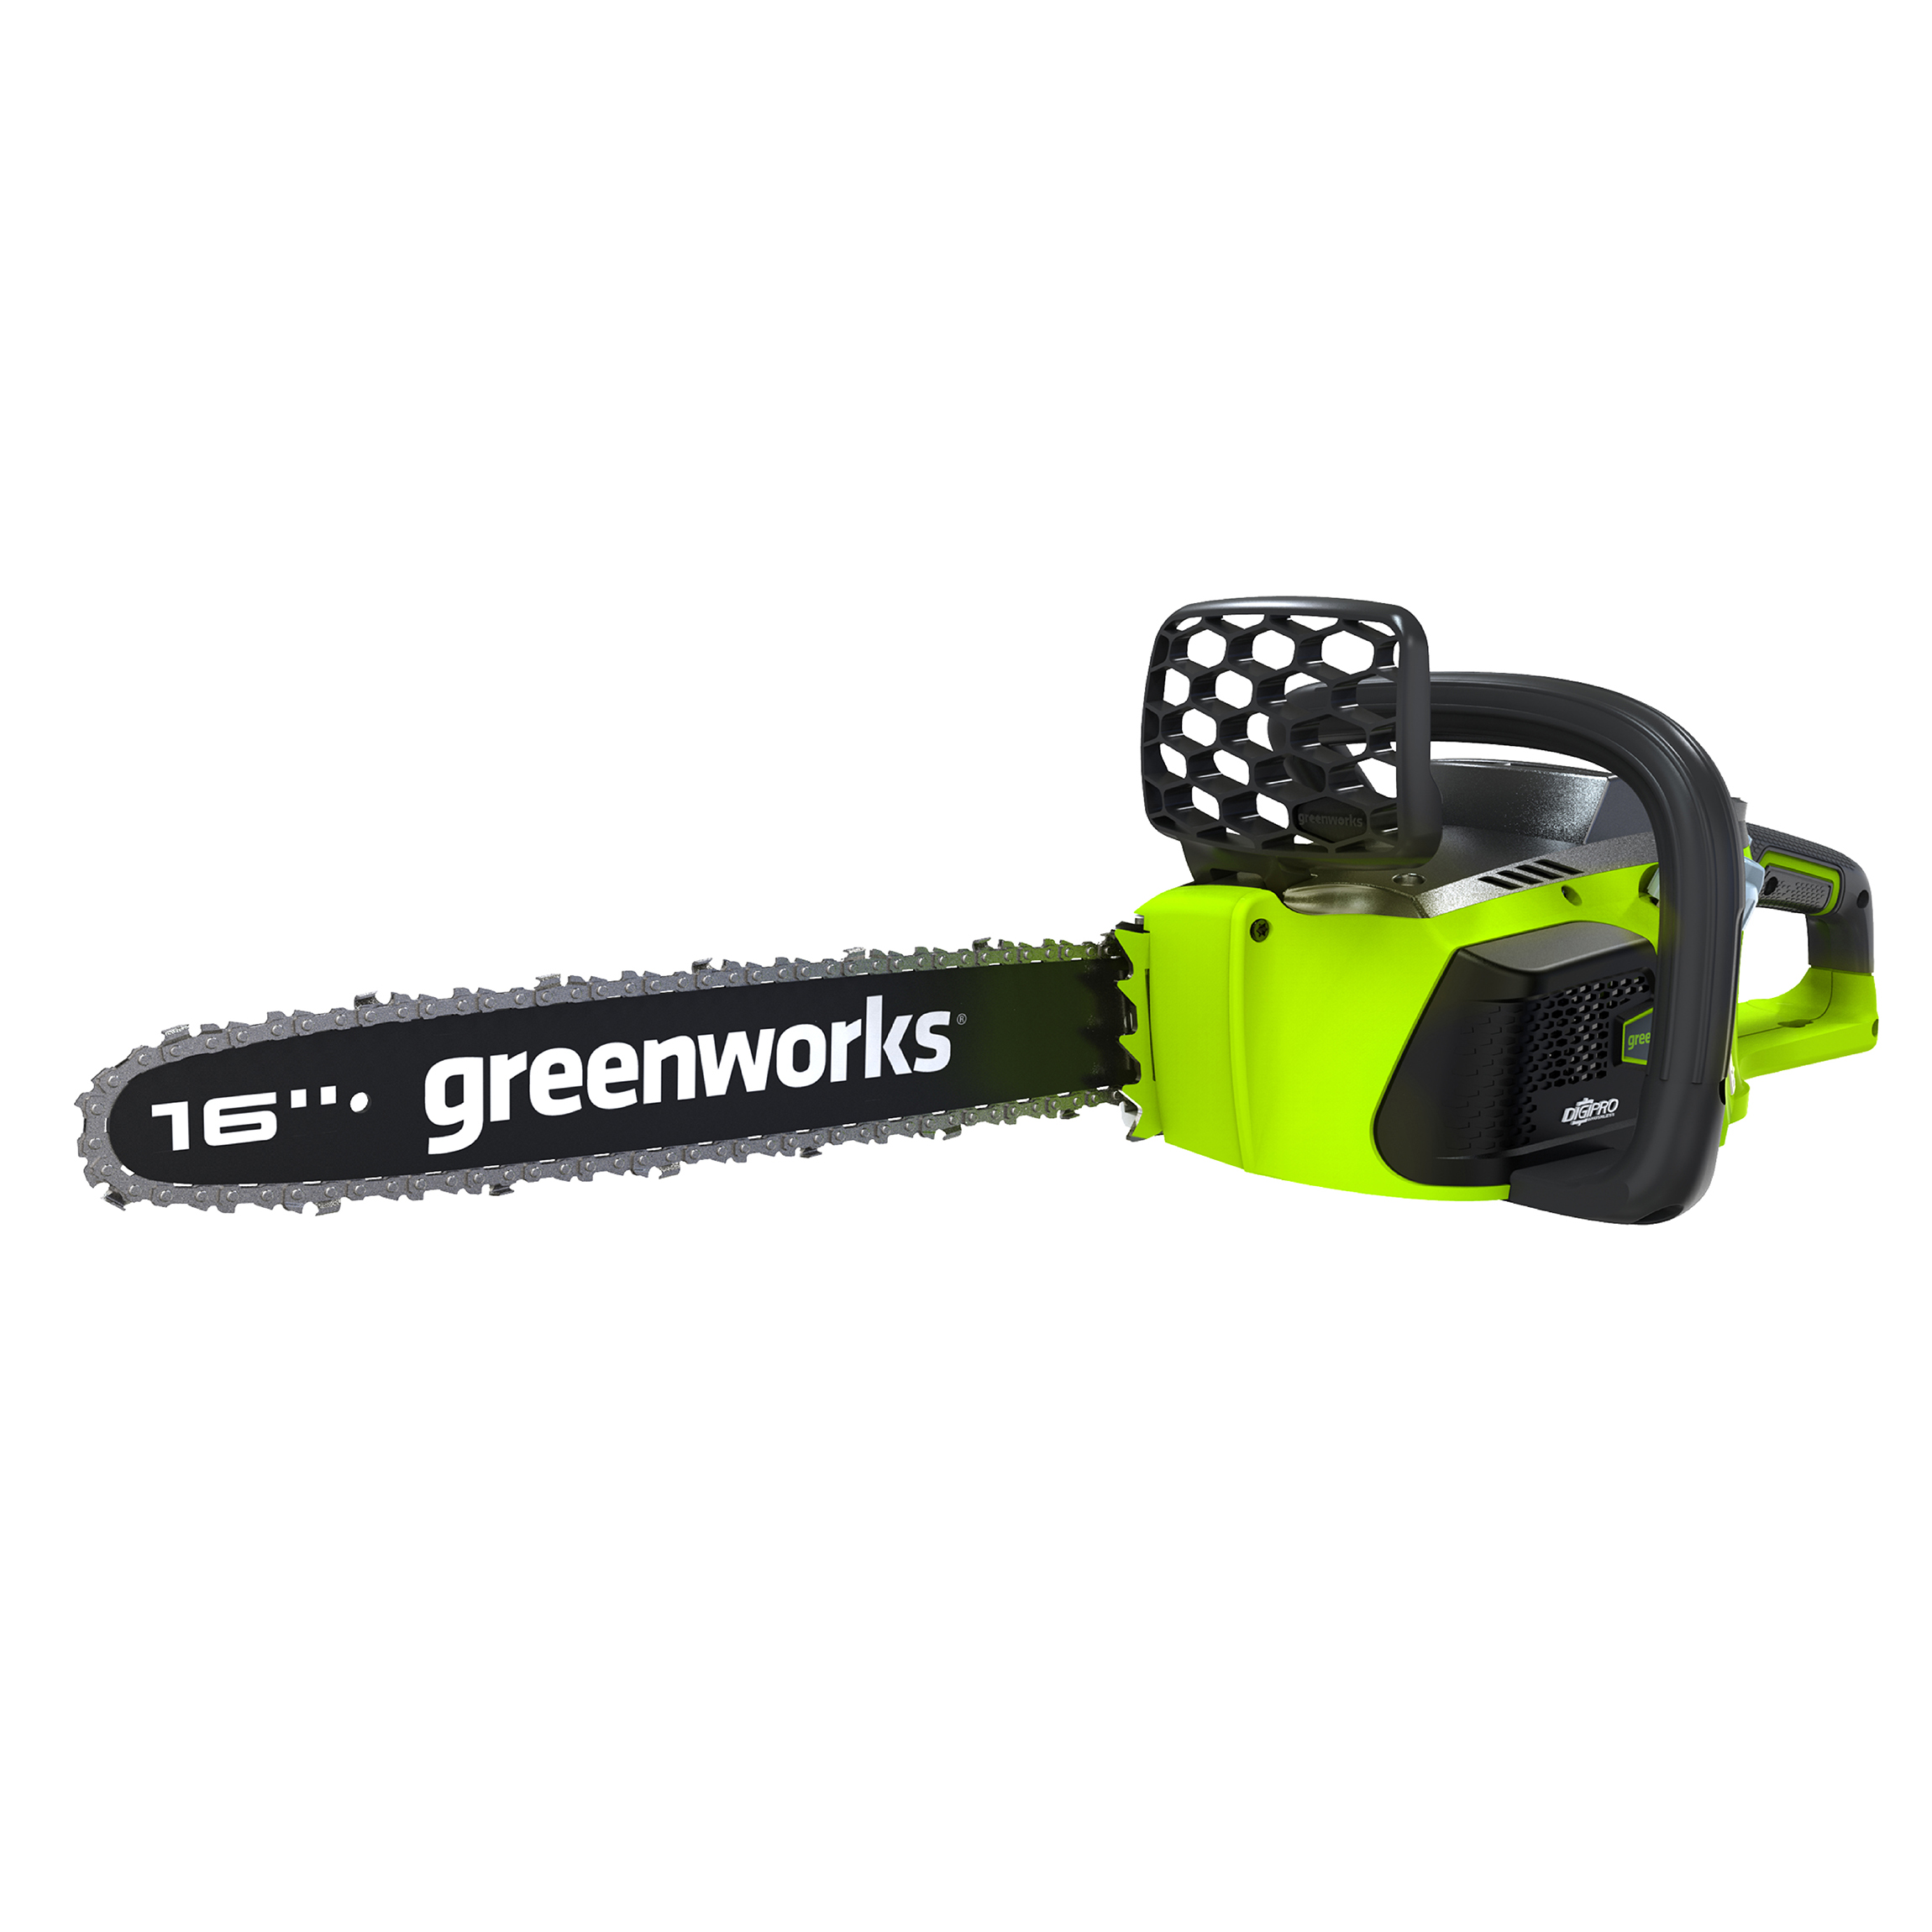 Greenworks GMax 40V 16 Inch Bar DigiPro Cordless Chainsaw (Battery Not Included) - image 1 of 13